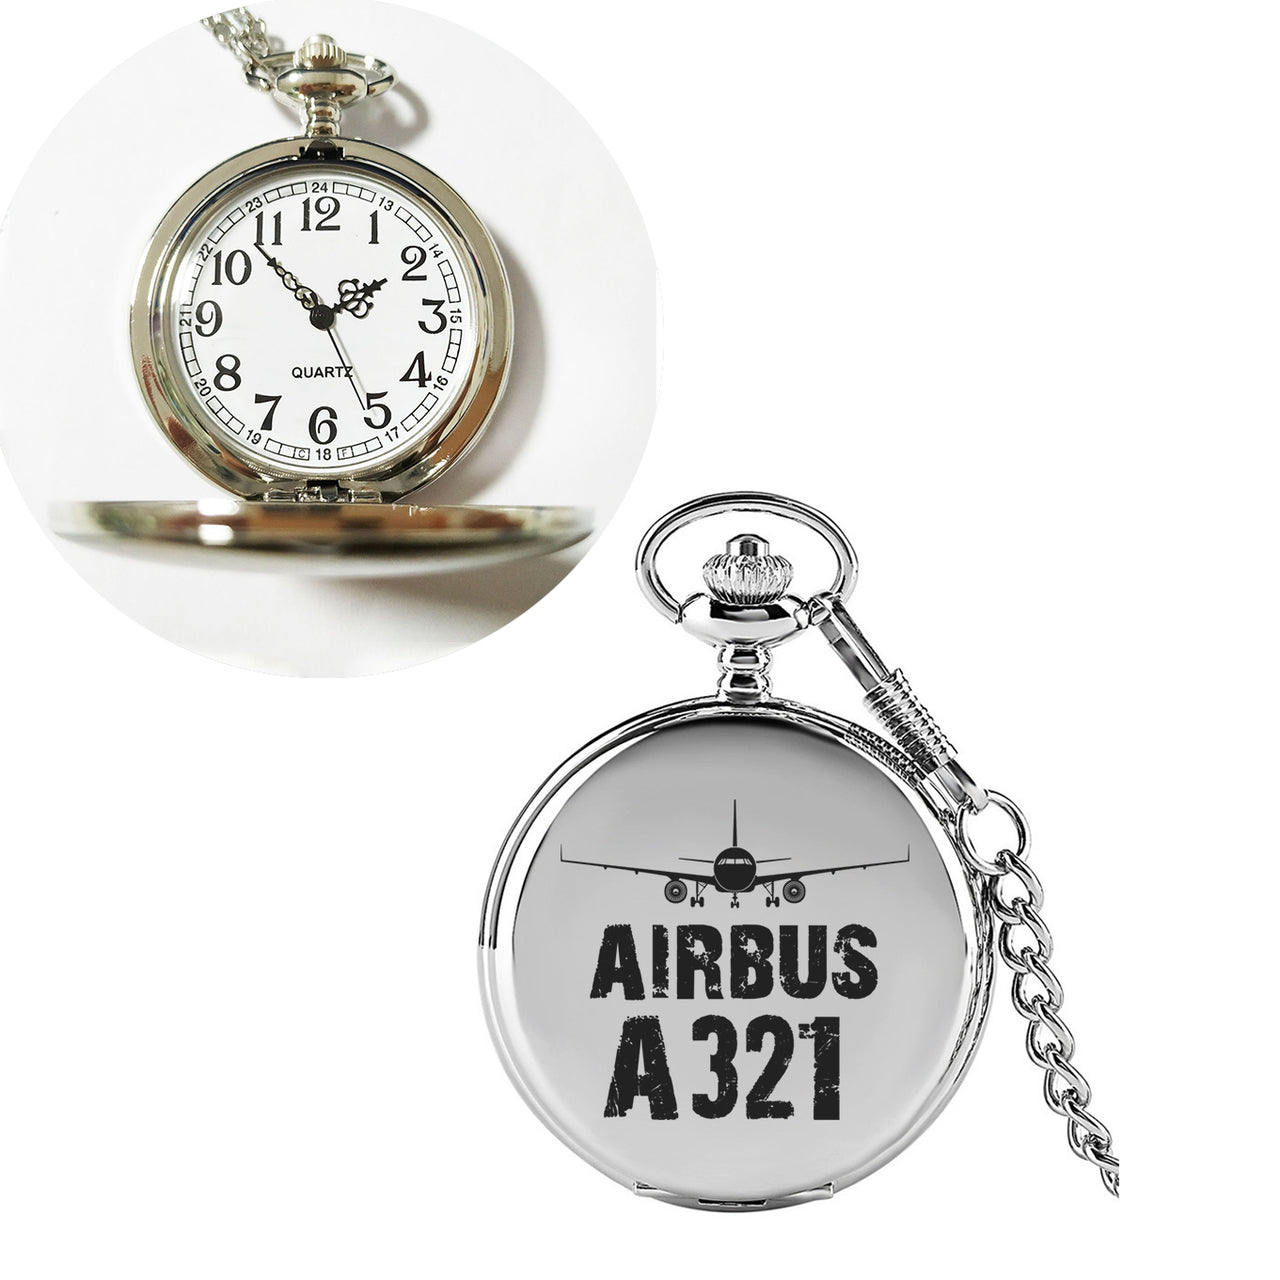 Airbus A321 & Plane Designed Pocket Watches